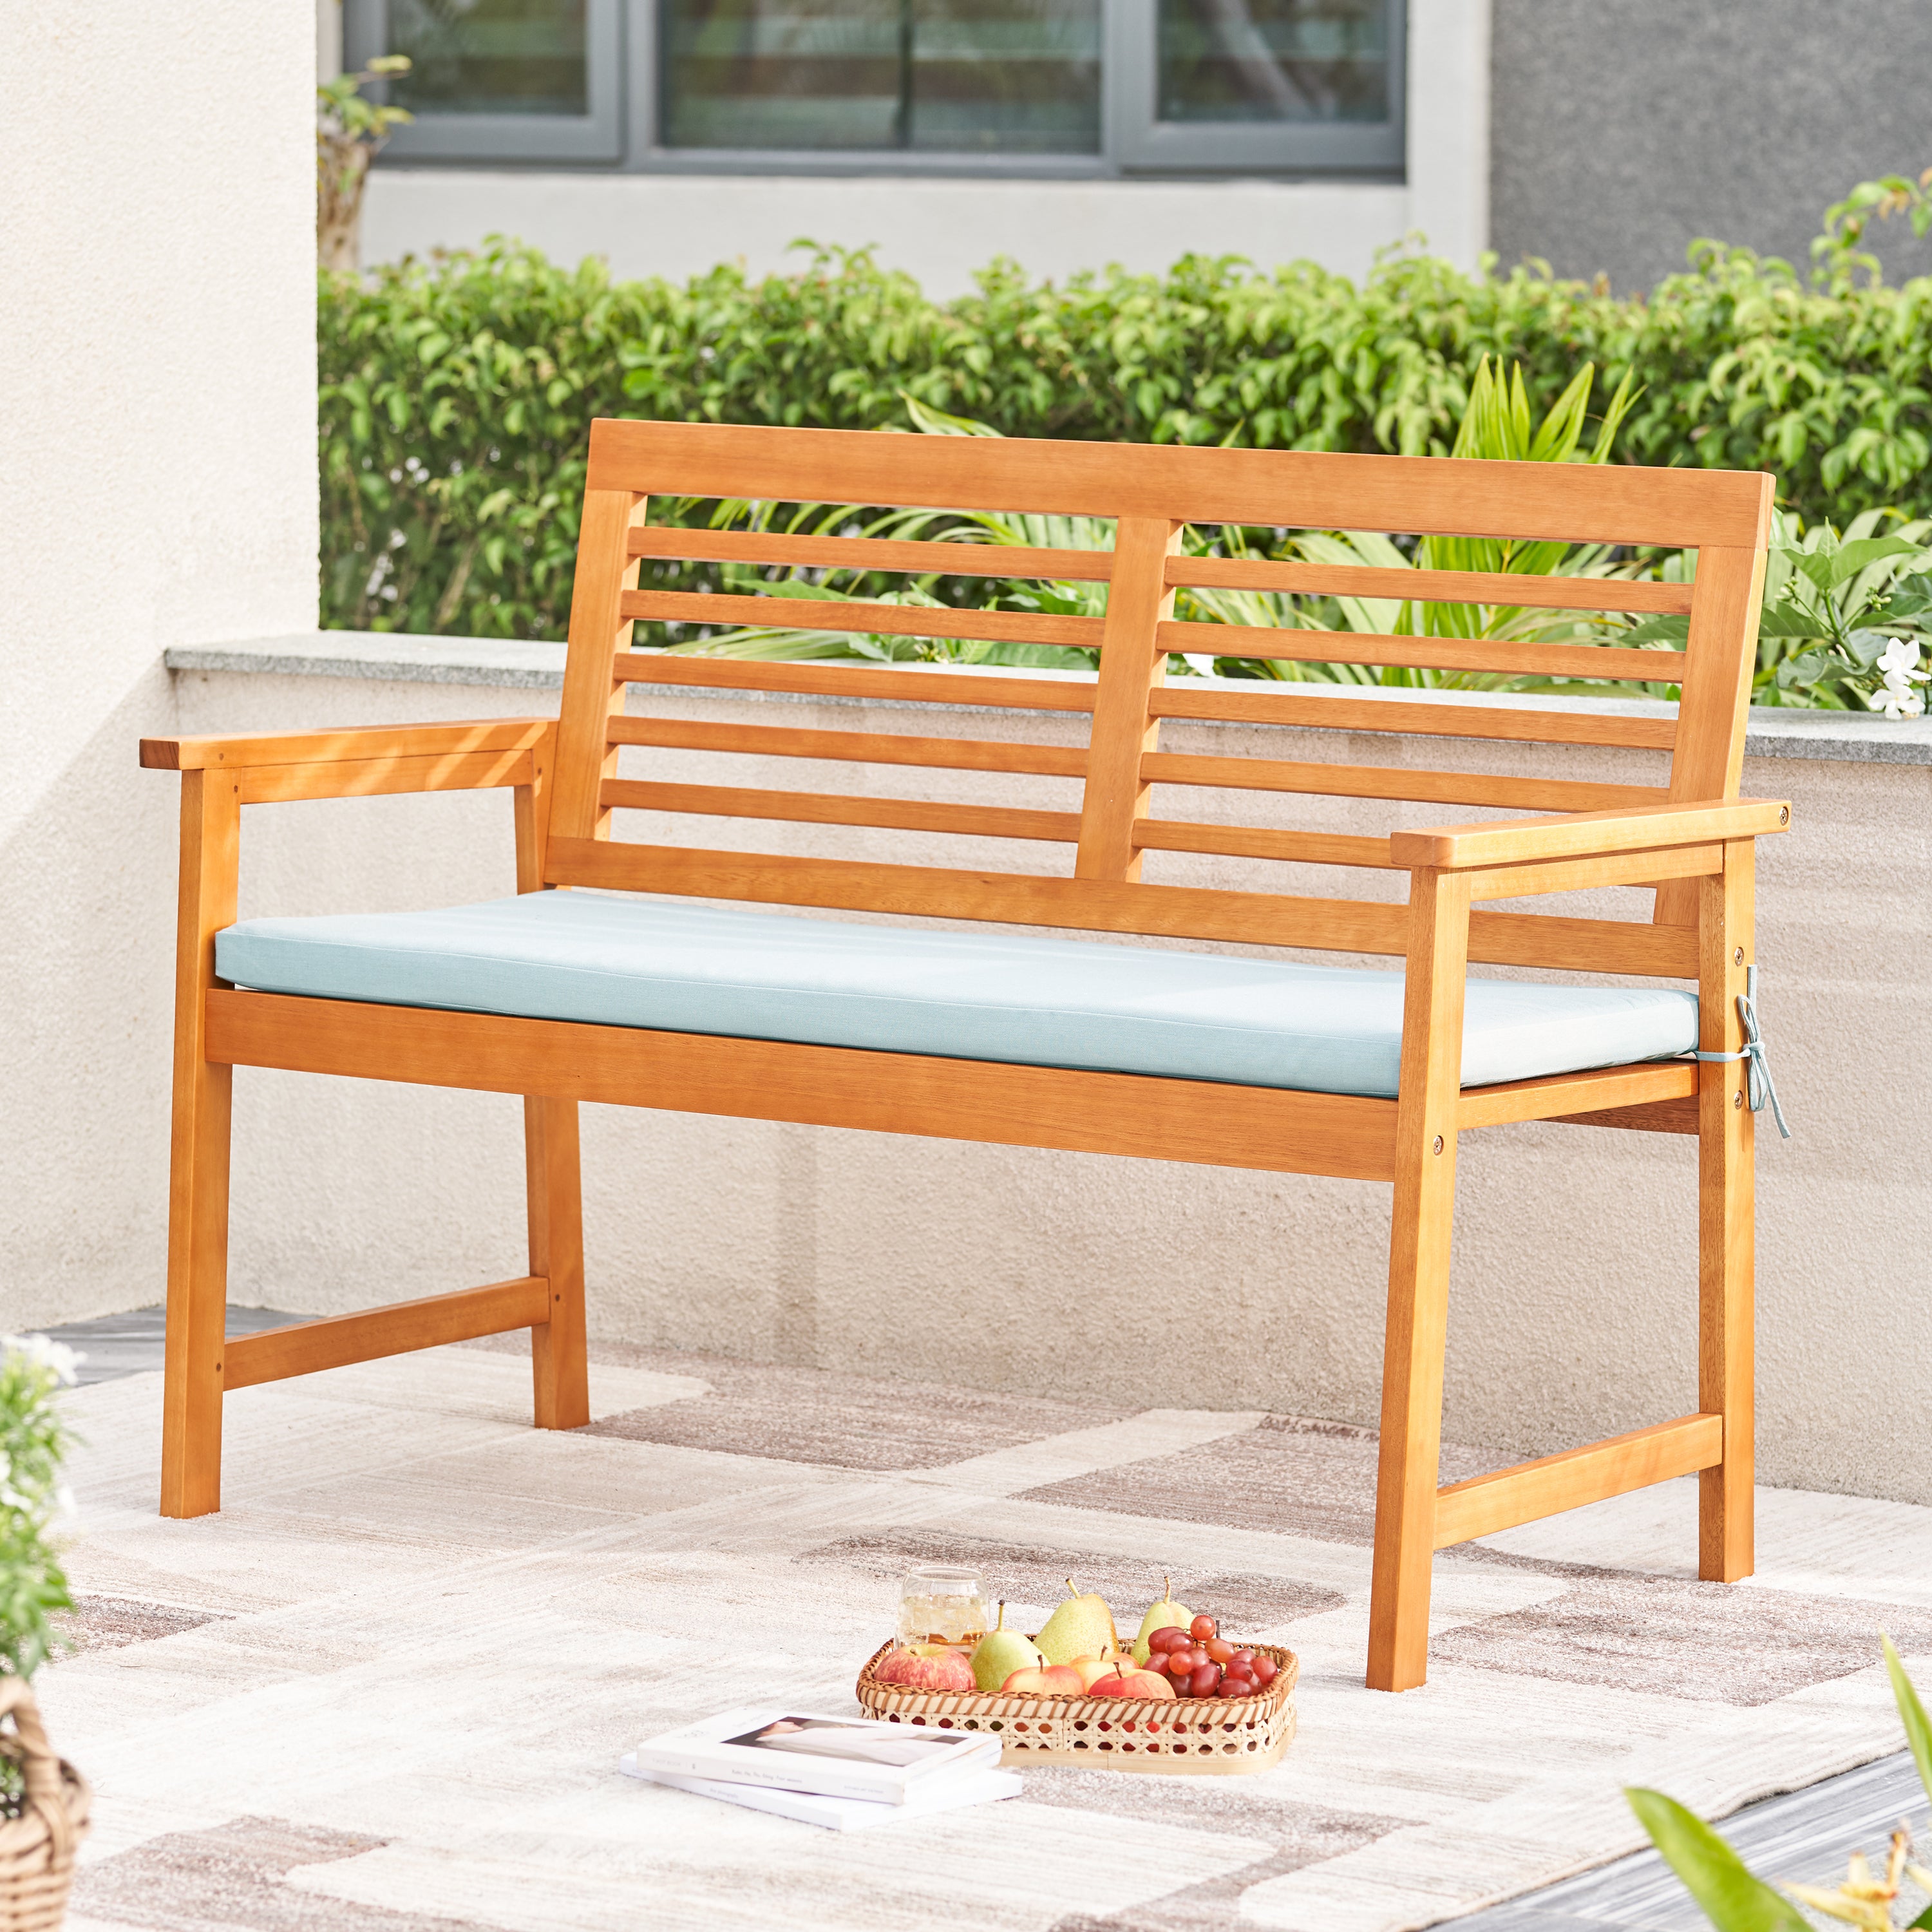 Waimea-Honey-Slatted-Eucalyptus-Wood-Garden-Bench-with-Cushion-Furniture-|-Outdoor-Furniture-|-Outdoor-Seating-|-Outdoor-Chairs